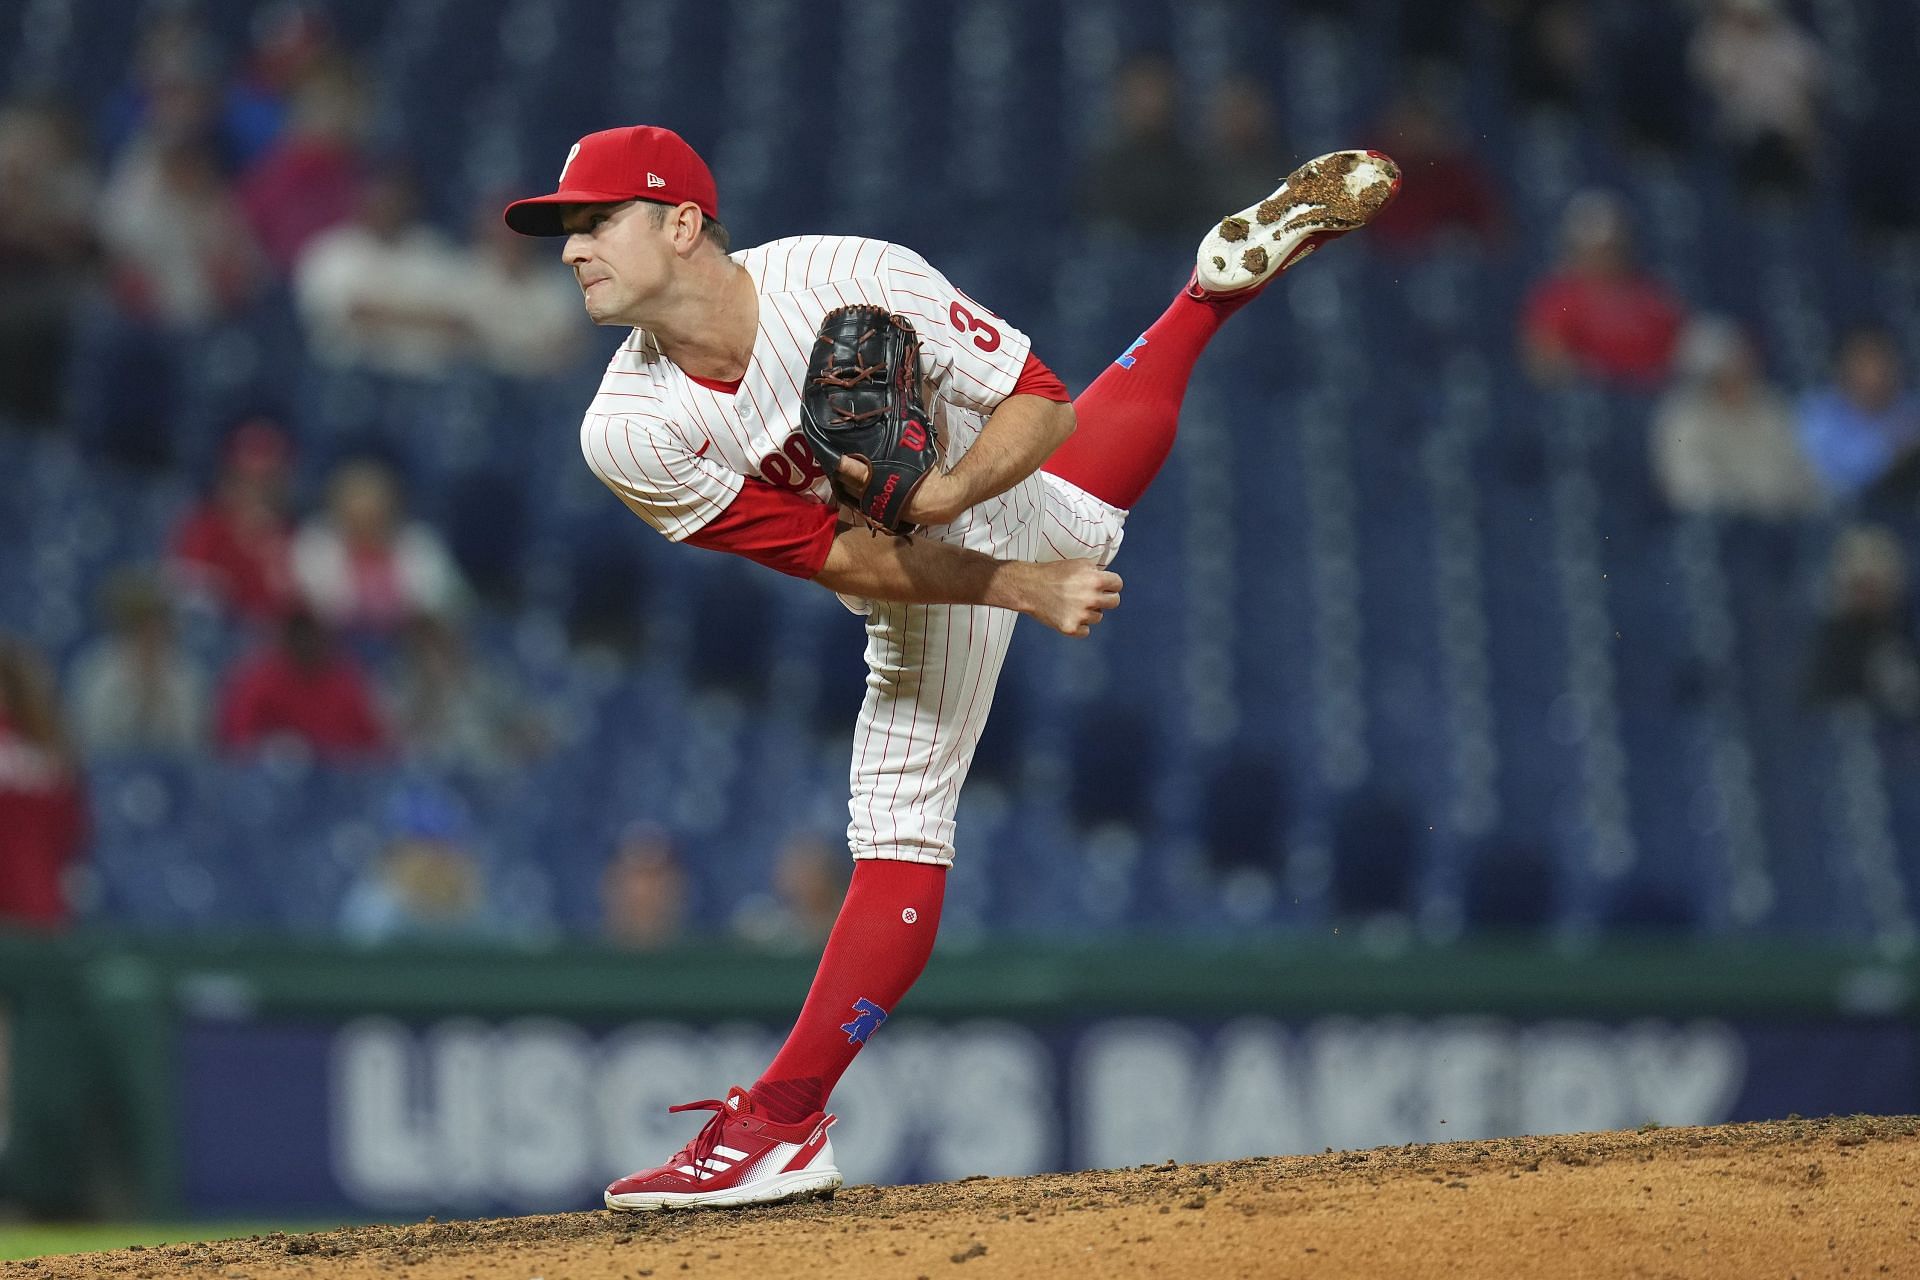 Phillies' Robertson out for NLDS after injuring calf during